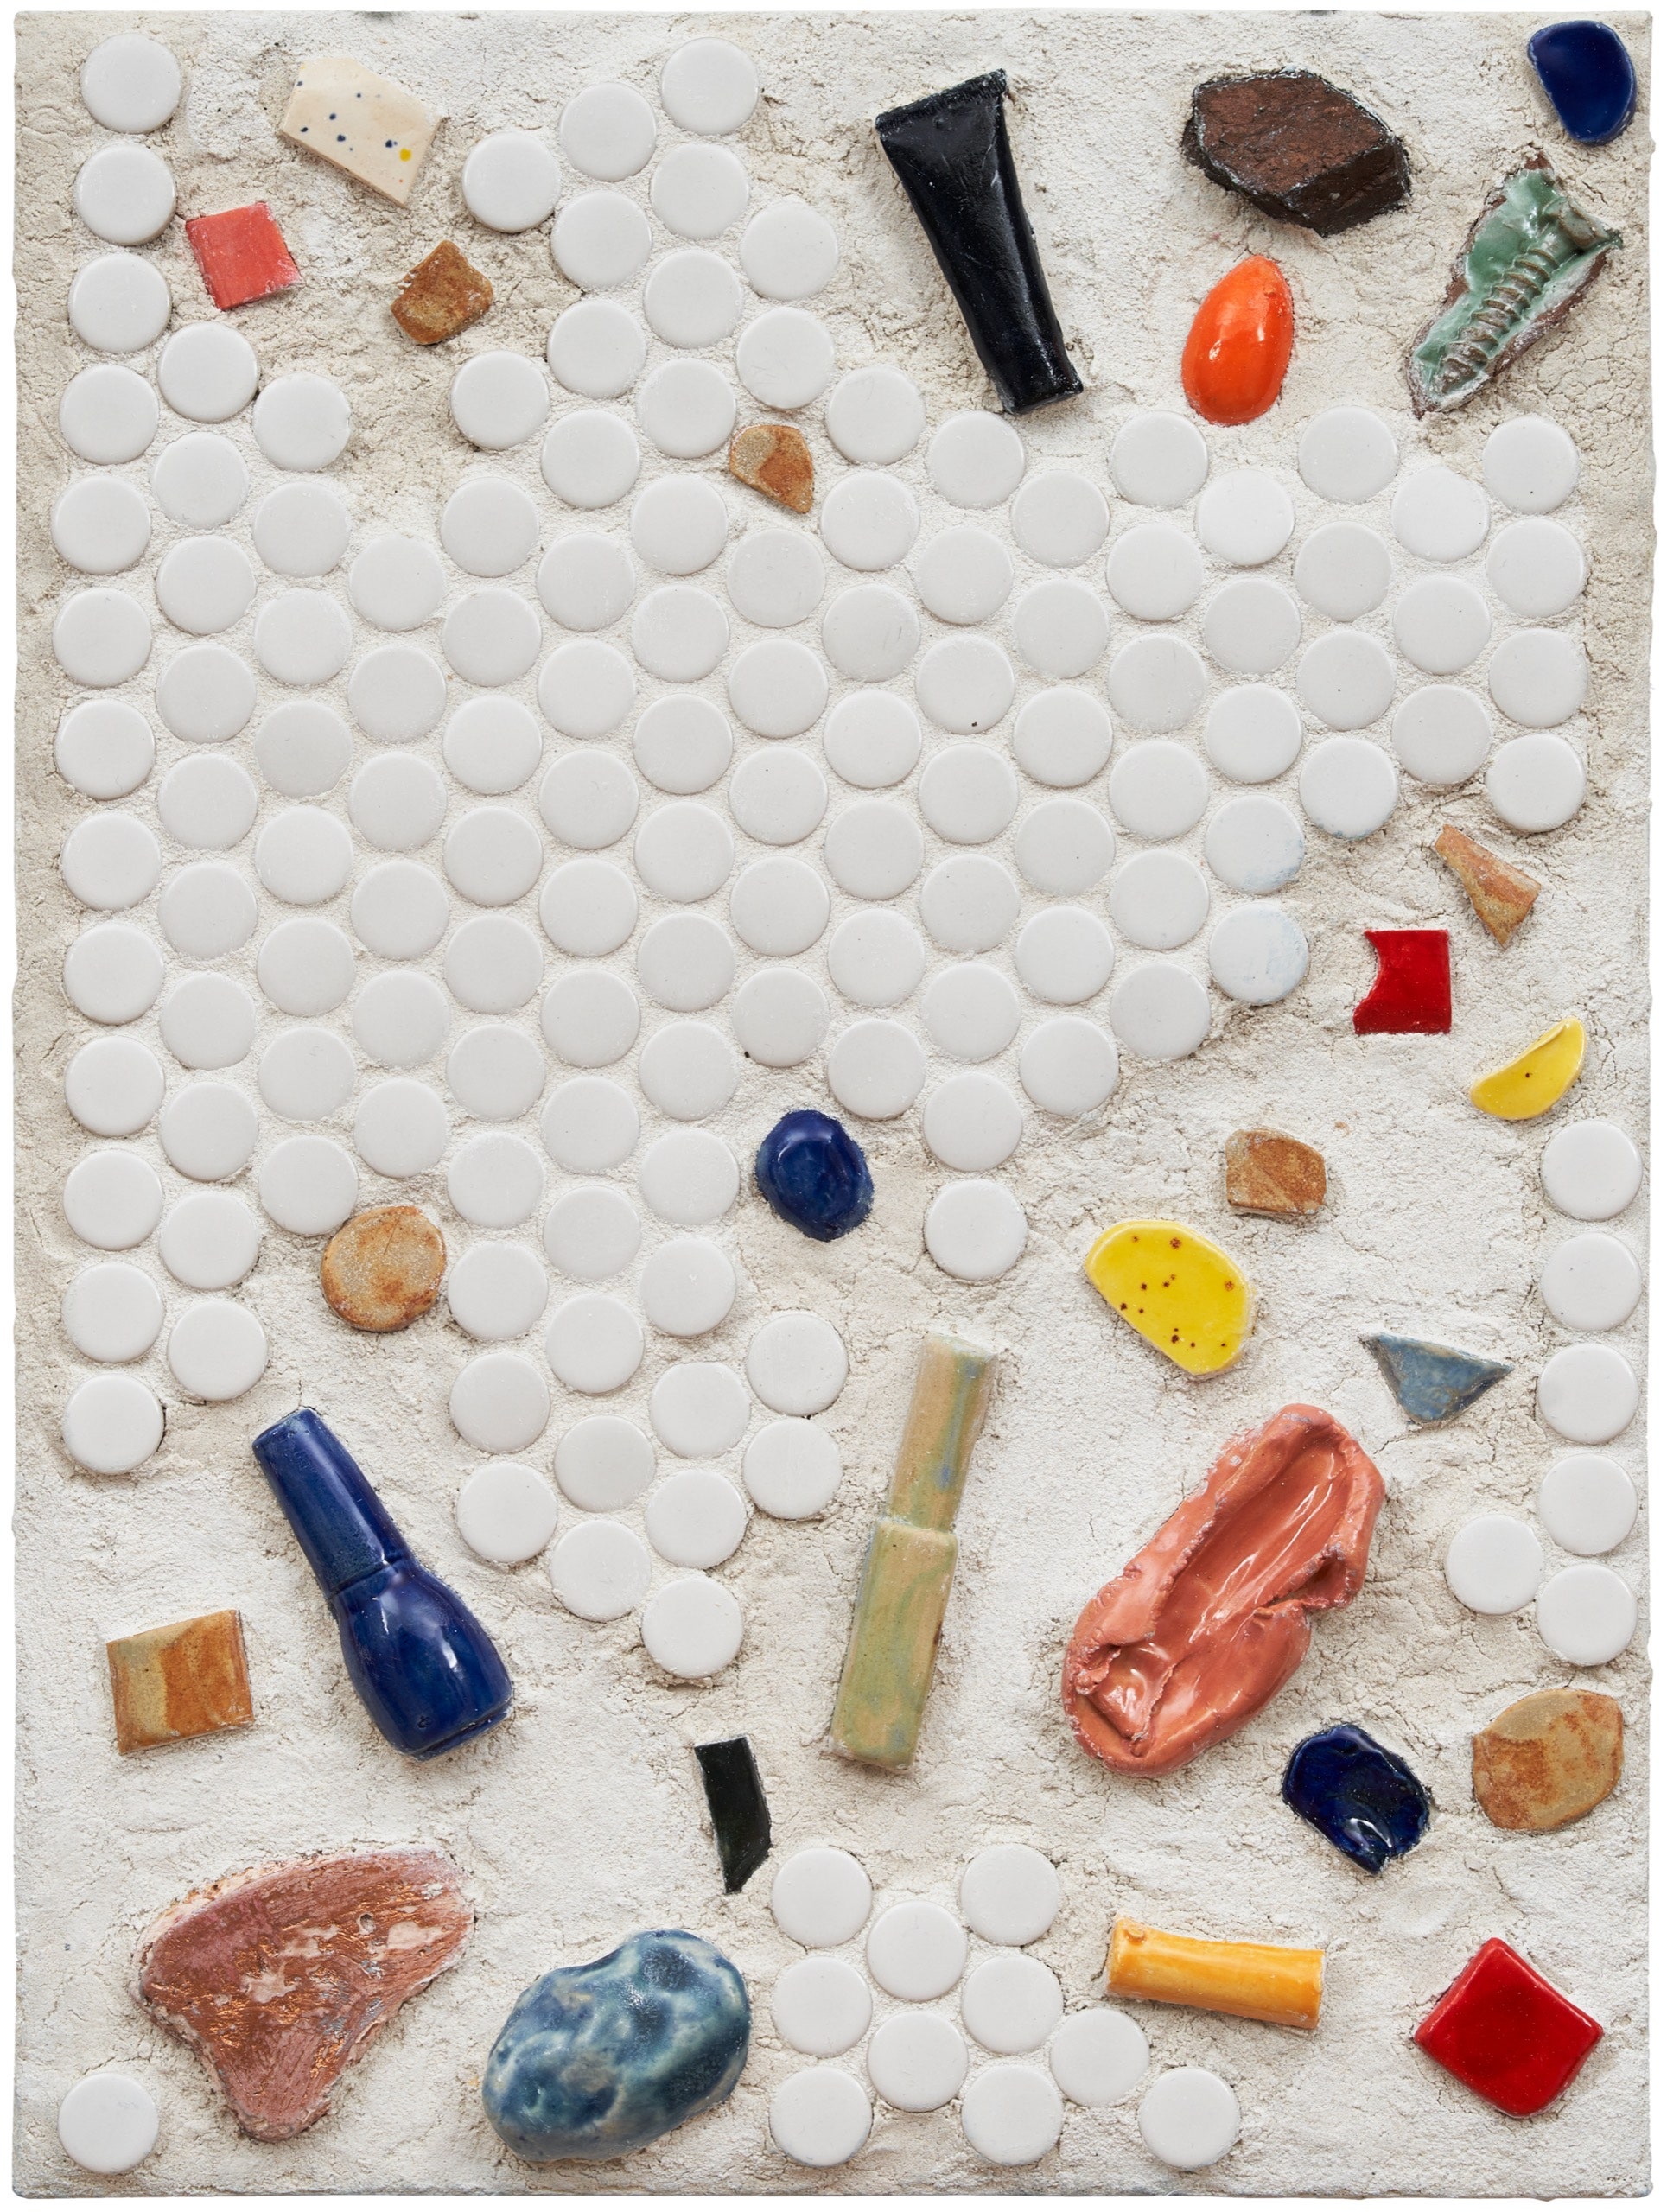 A panel of glazed ceramic tile grout pigment and resin is the artwork of artist Ilana HarrisBabou